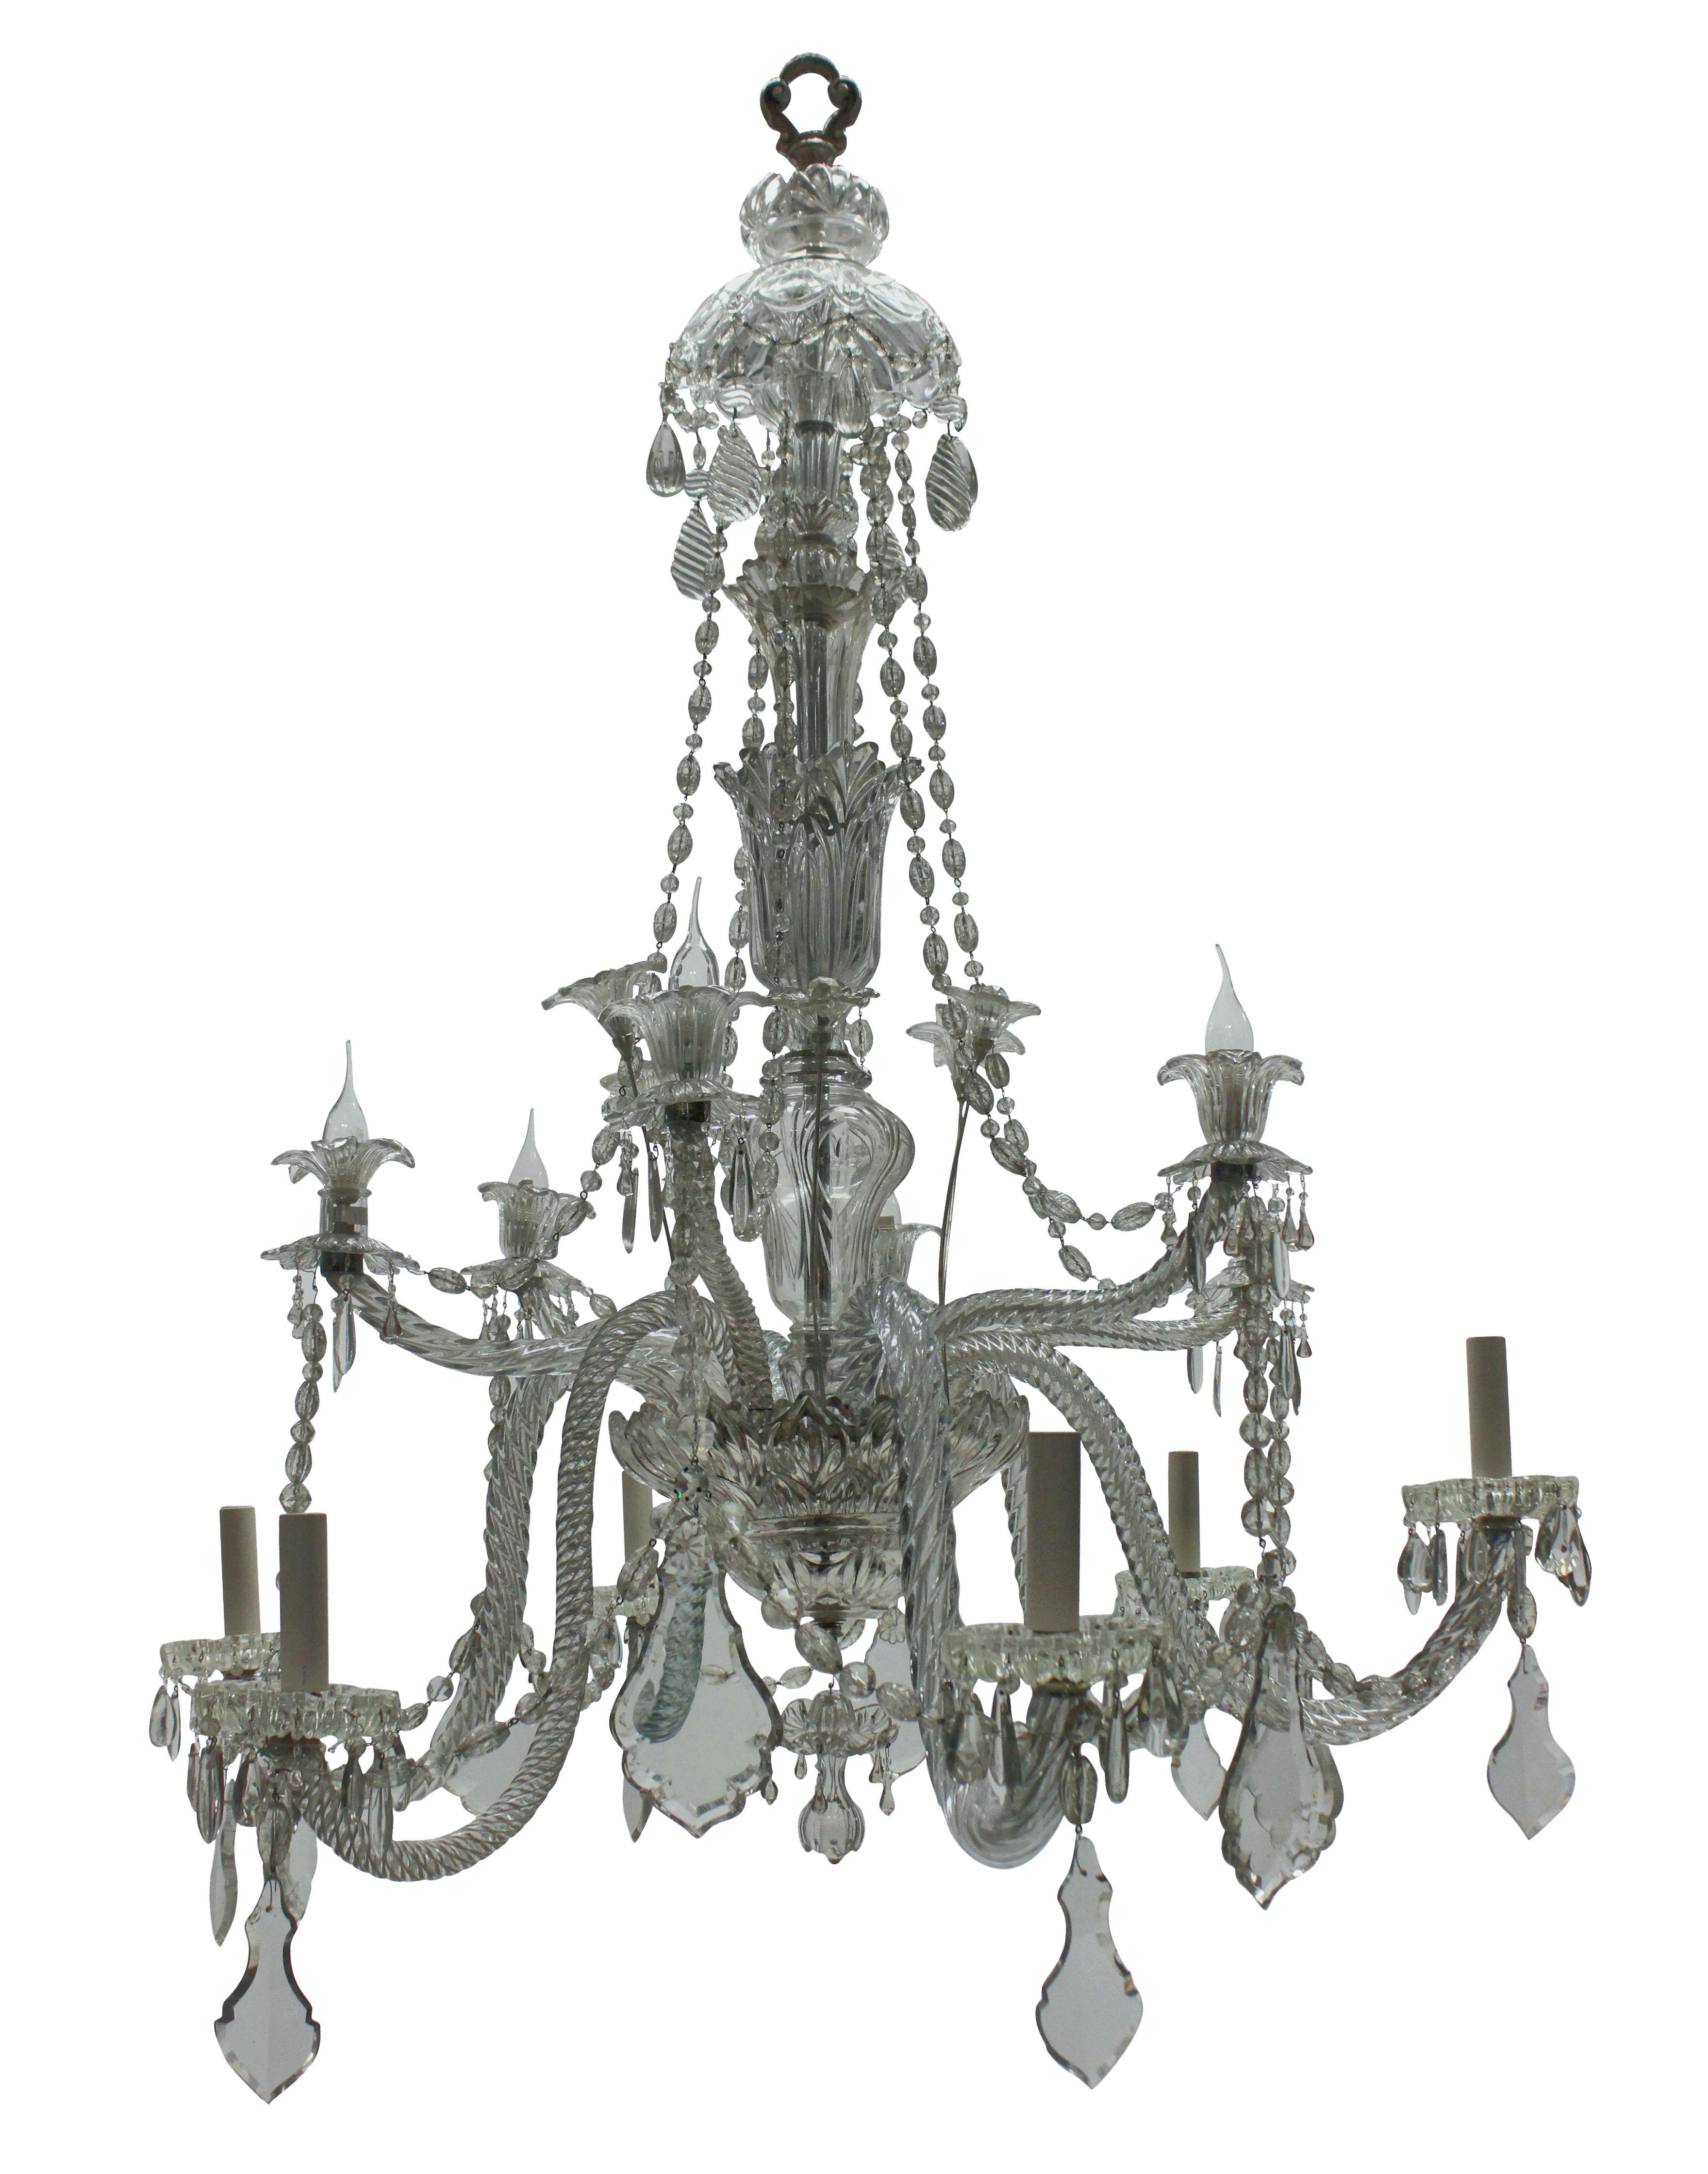 A large French chandelier by Baccarat, consisting of twelve arms over two tiers. Profusely decorated with foliate details, swags, and pendant drops.